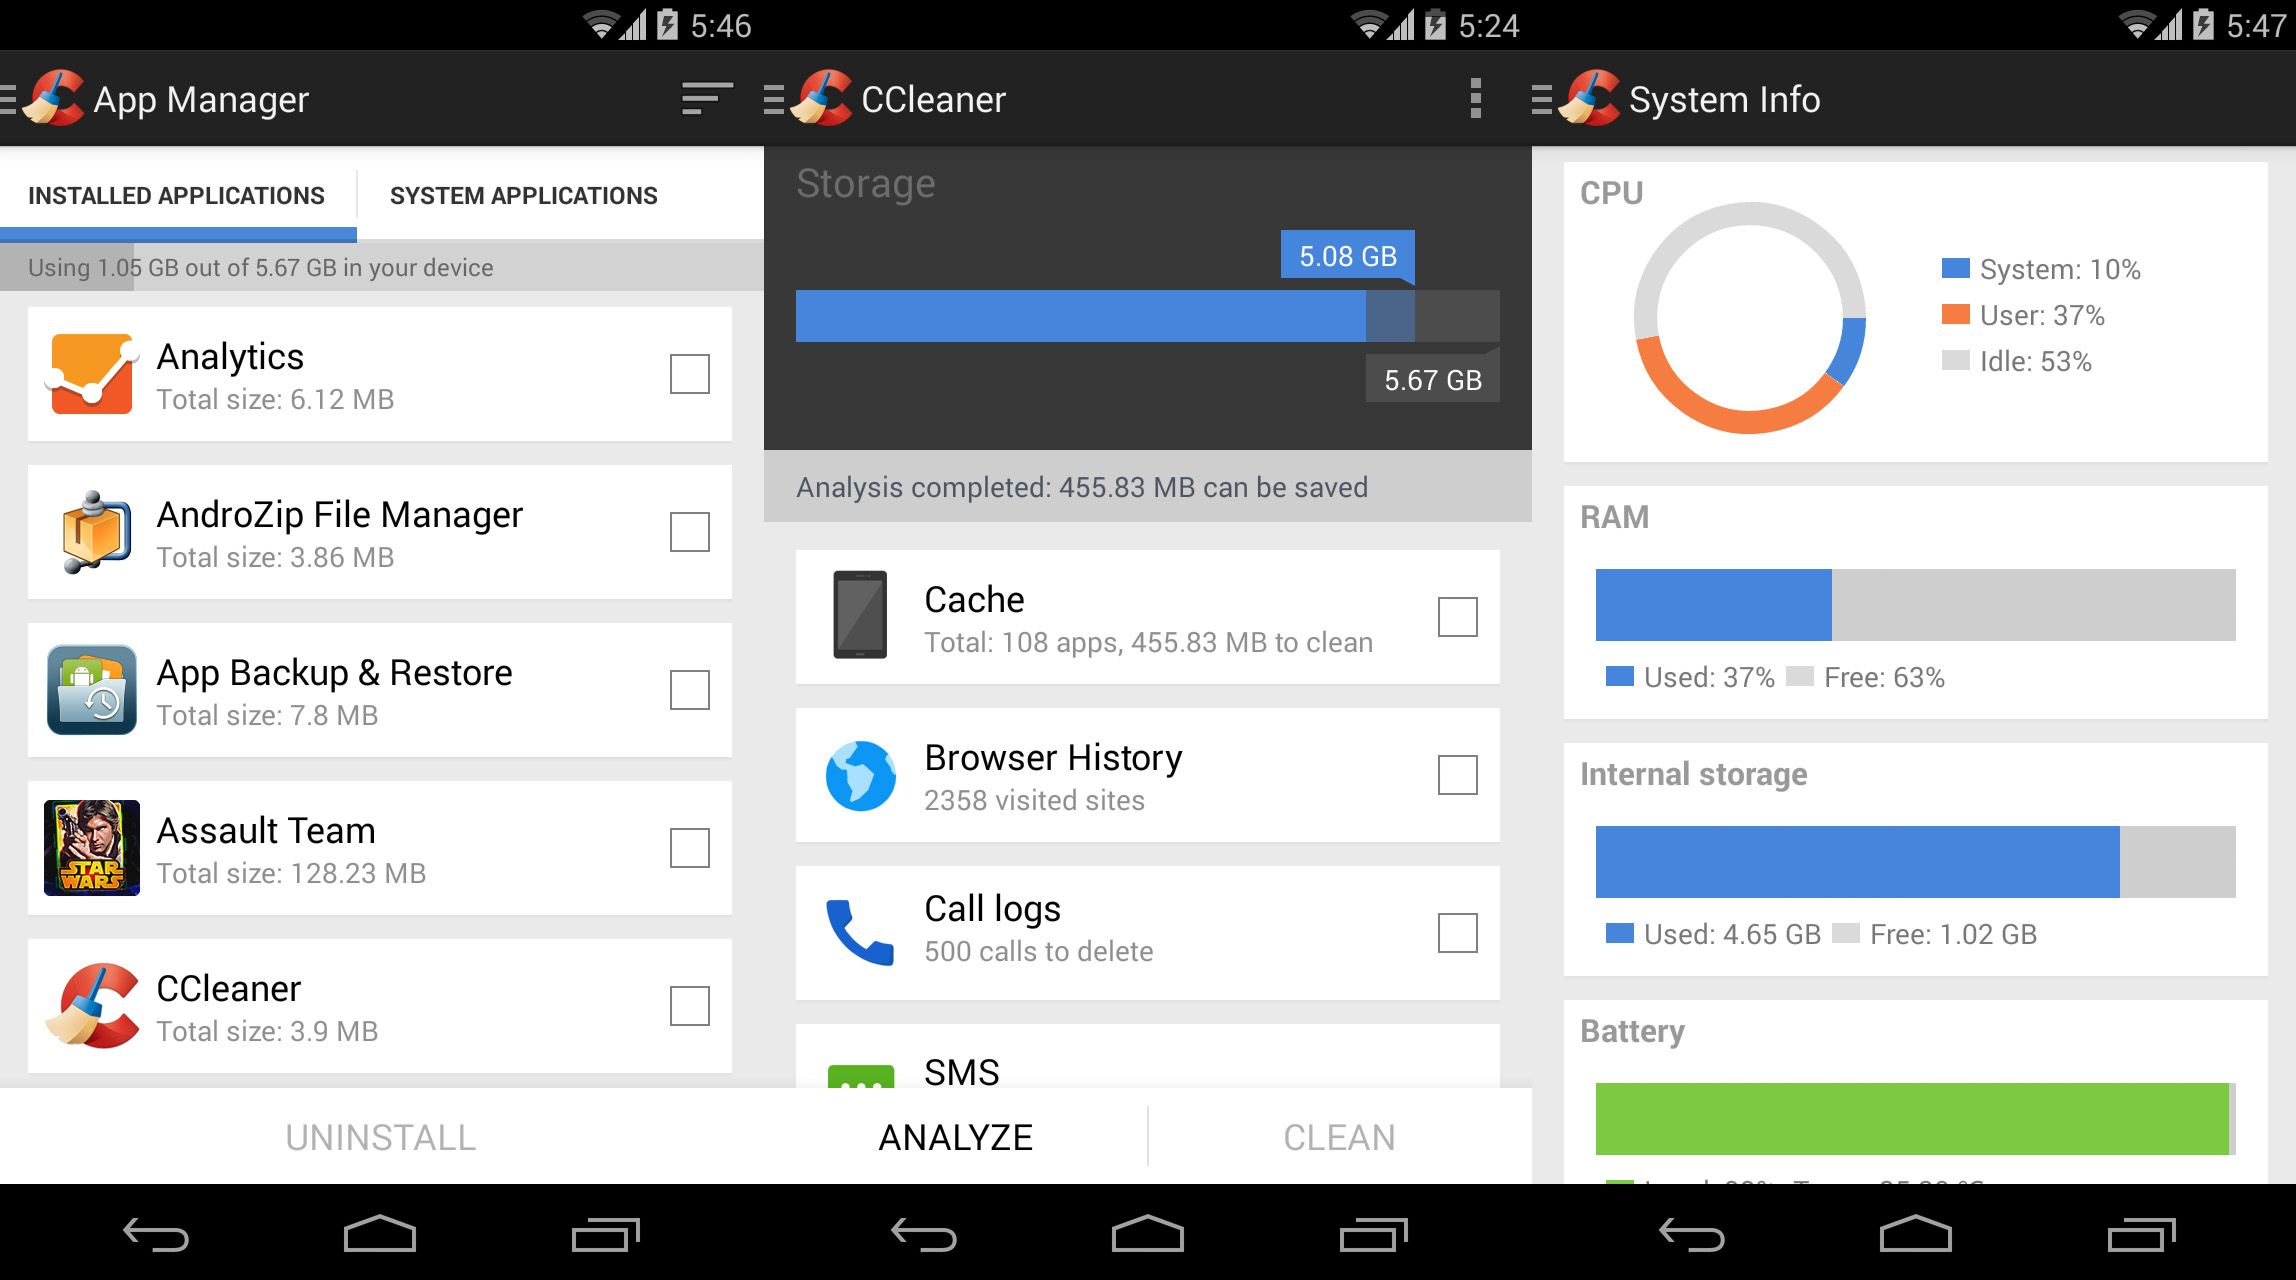 How to download ccleaner for free - Felices ccleaner windows 10 just a moment HTC Desire